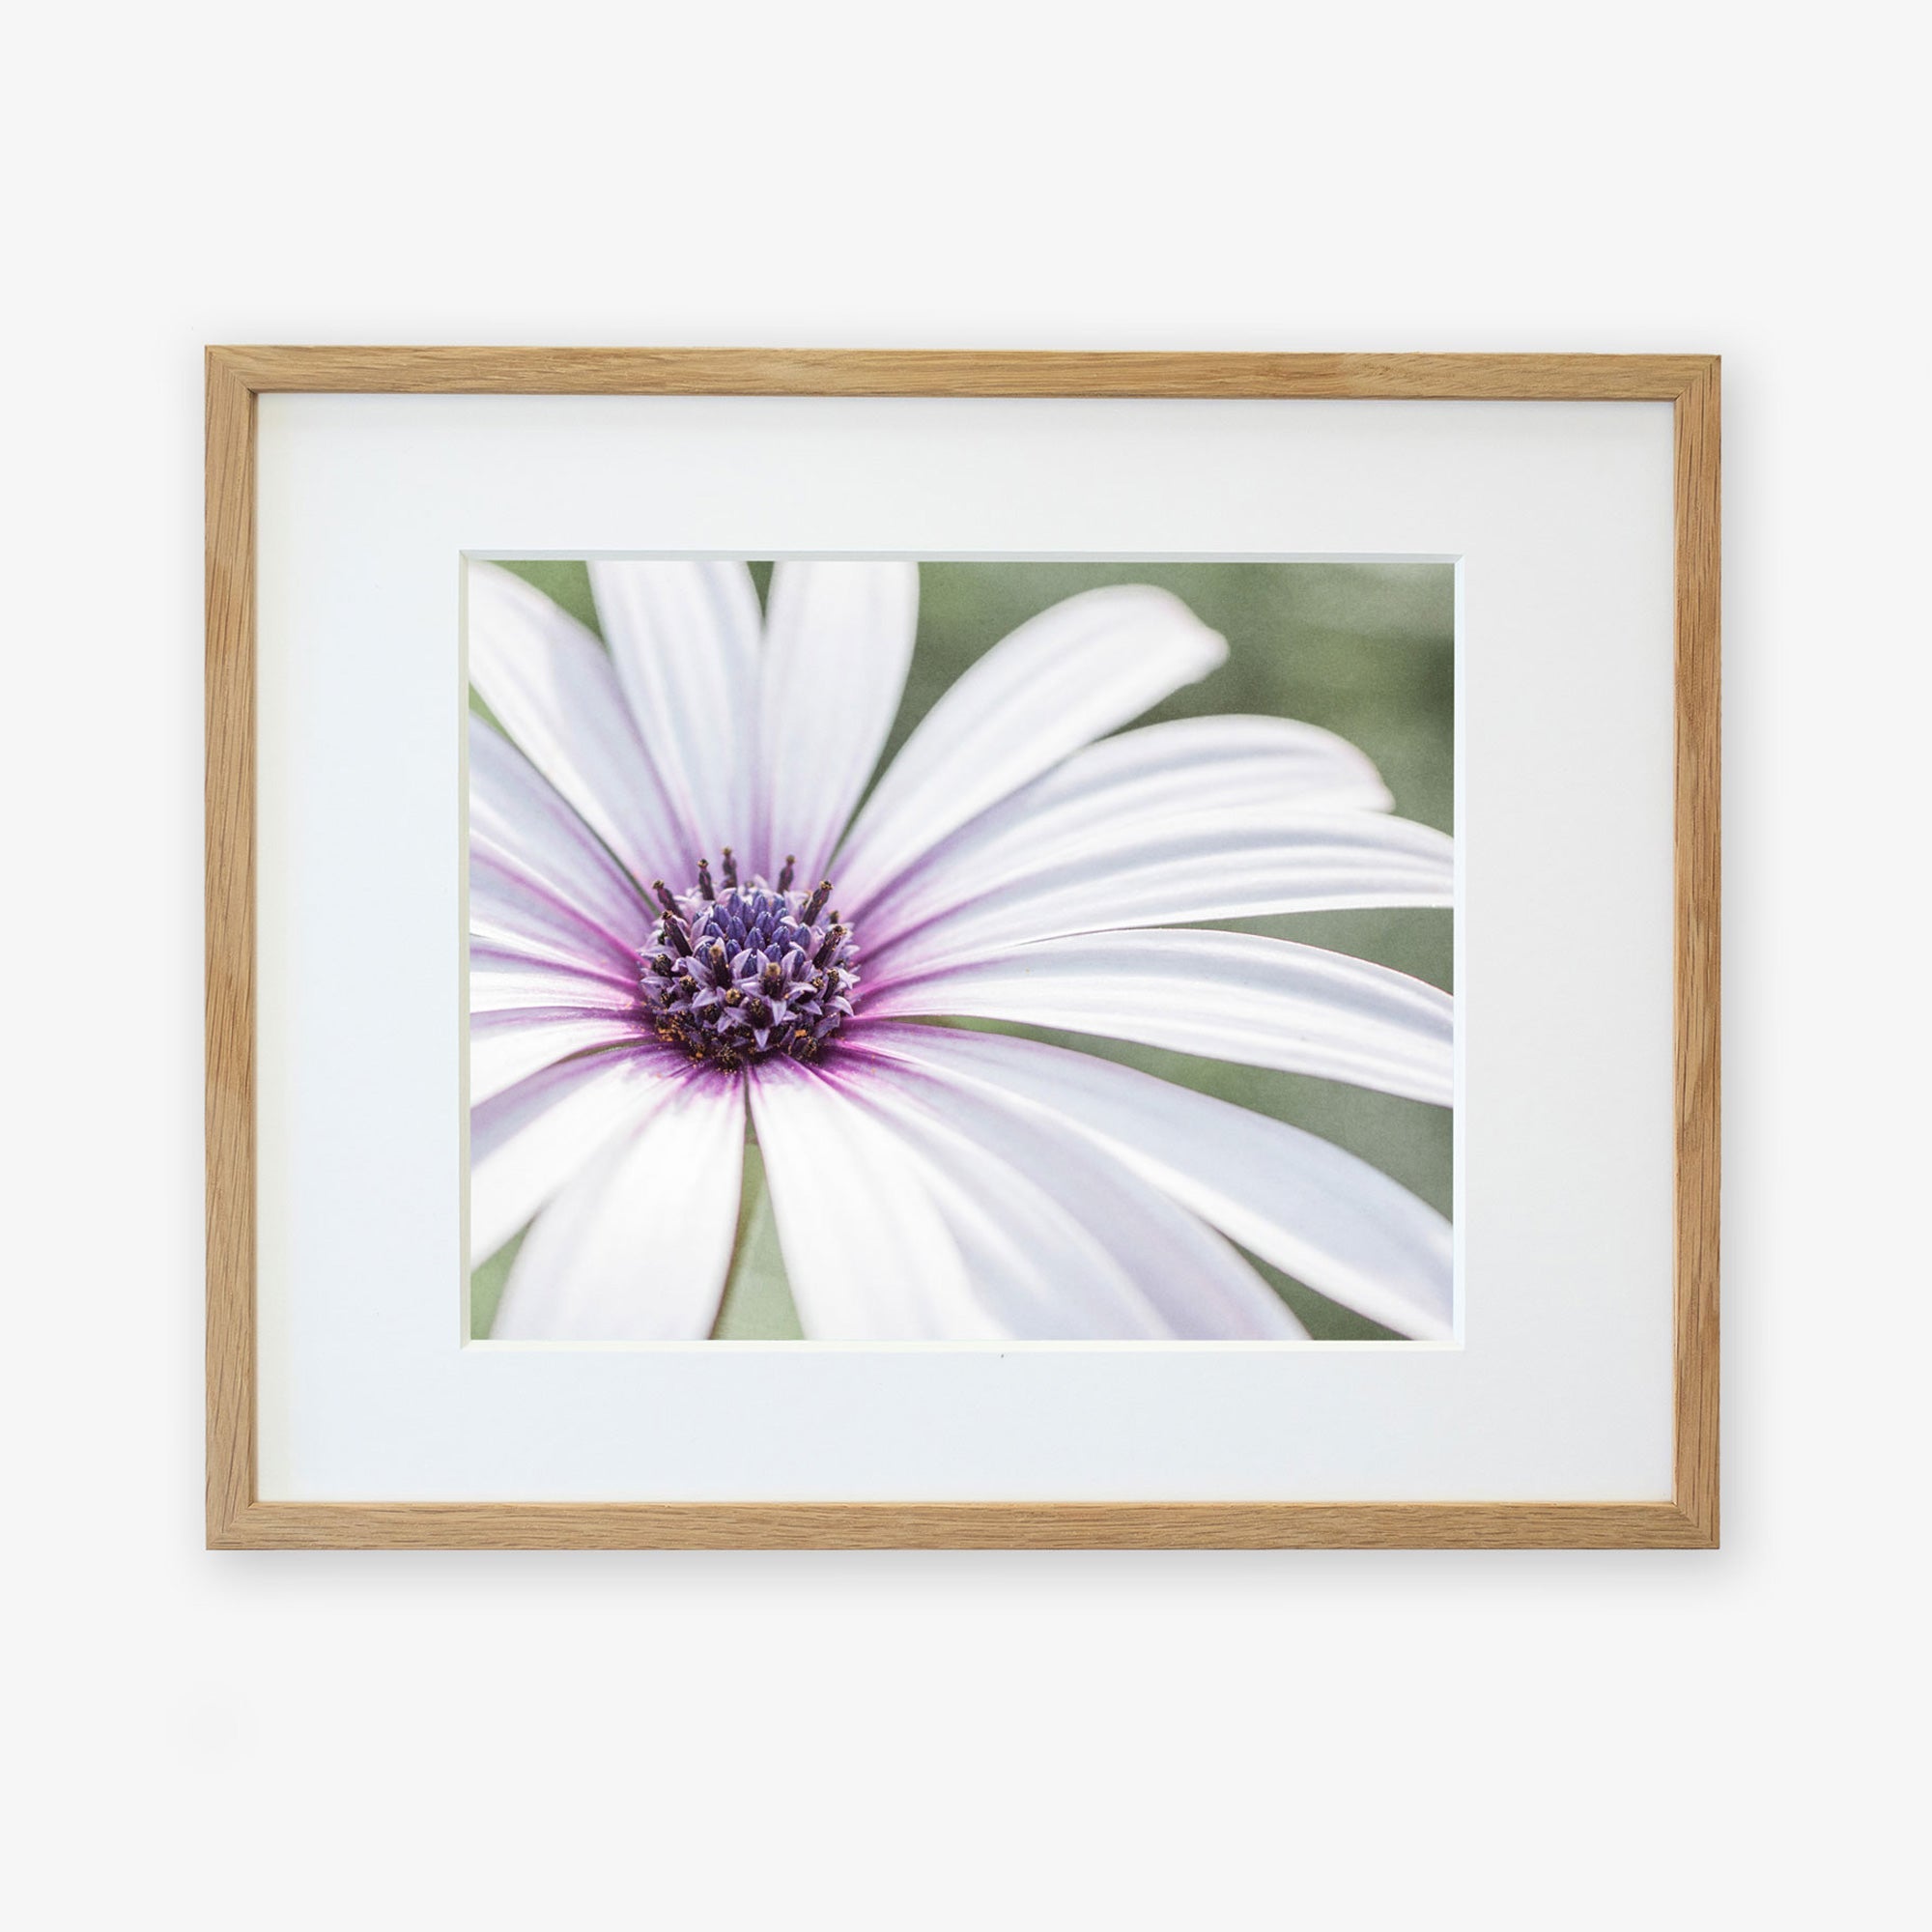 A framed photograph of a Large White Daisy Flower Print, &#39;Bed of Petals&#39; by Offley Green, with long petals and a detailed, textured center, printed on archival photographic paper, displayed against a white background.